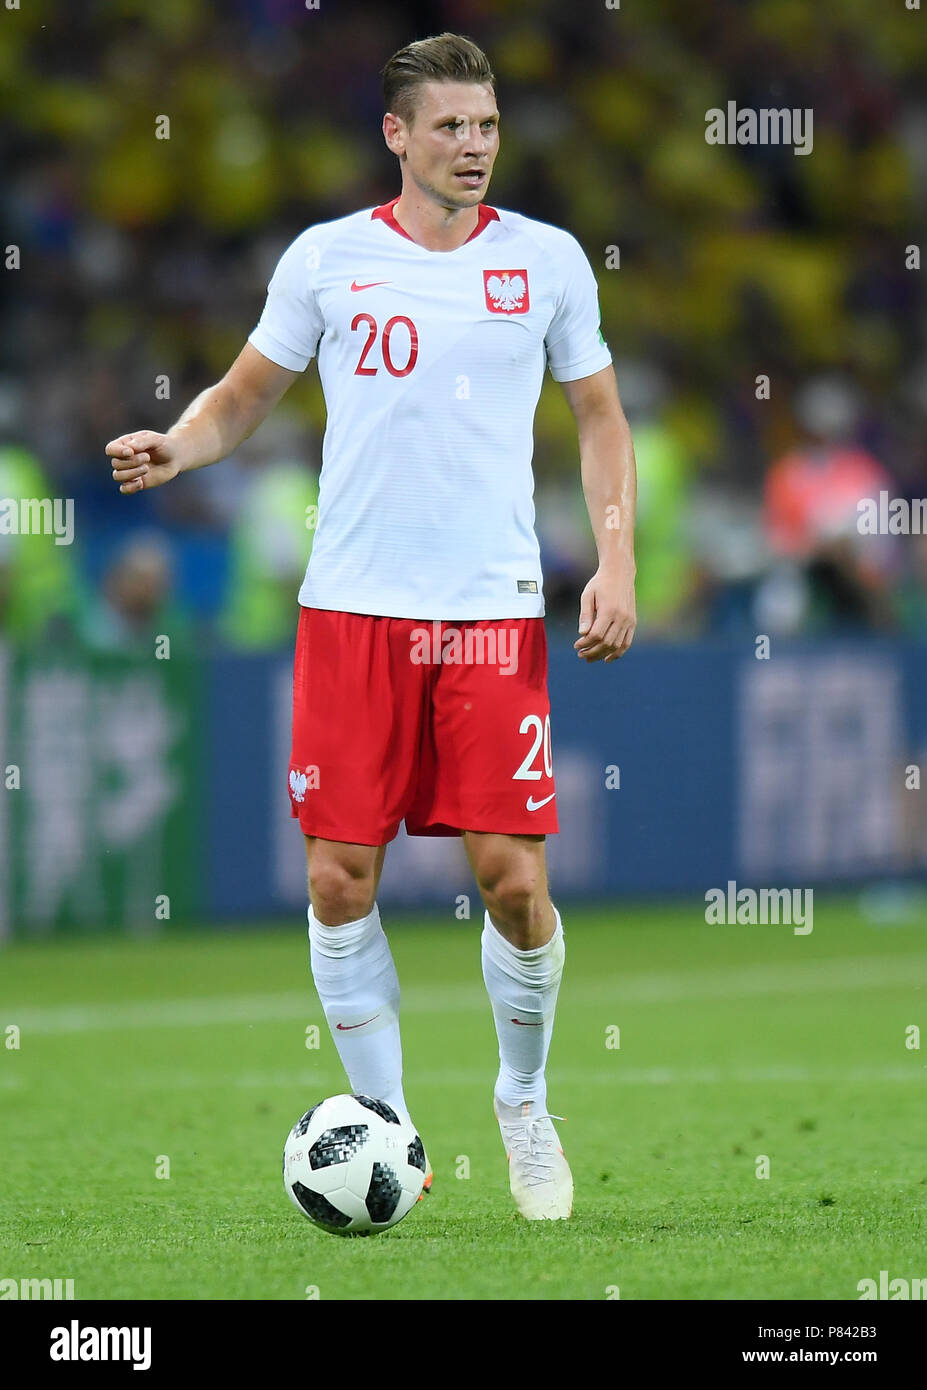 KAZAN, RUSSIA - JUNE 24: Lukasz Piszczek of Poland in action during the 2018 FIFA World Cup Russia group H match between Poland and Colombia at Kazan Arena on June 24, 2018 in Kazan, Russia. (Photo by Lukasz Laskowski/PressFocus/MB Media) Stock Photo